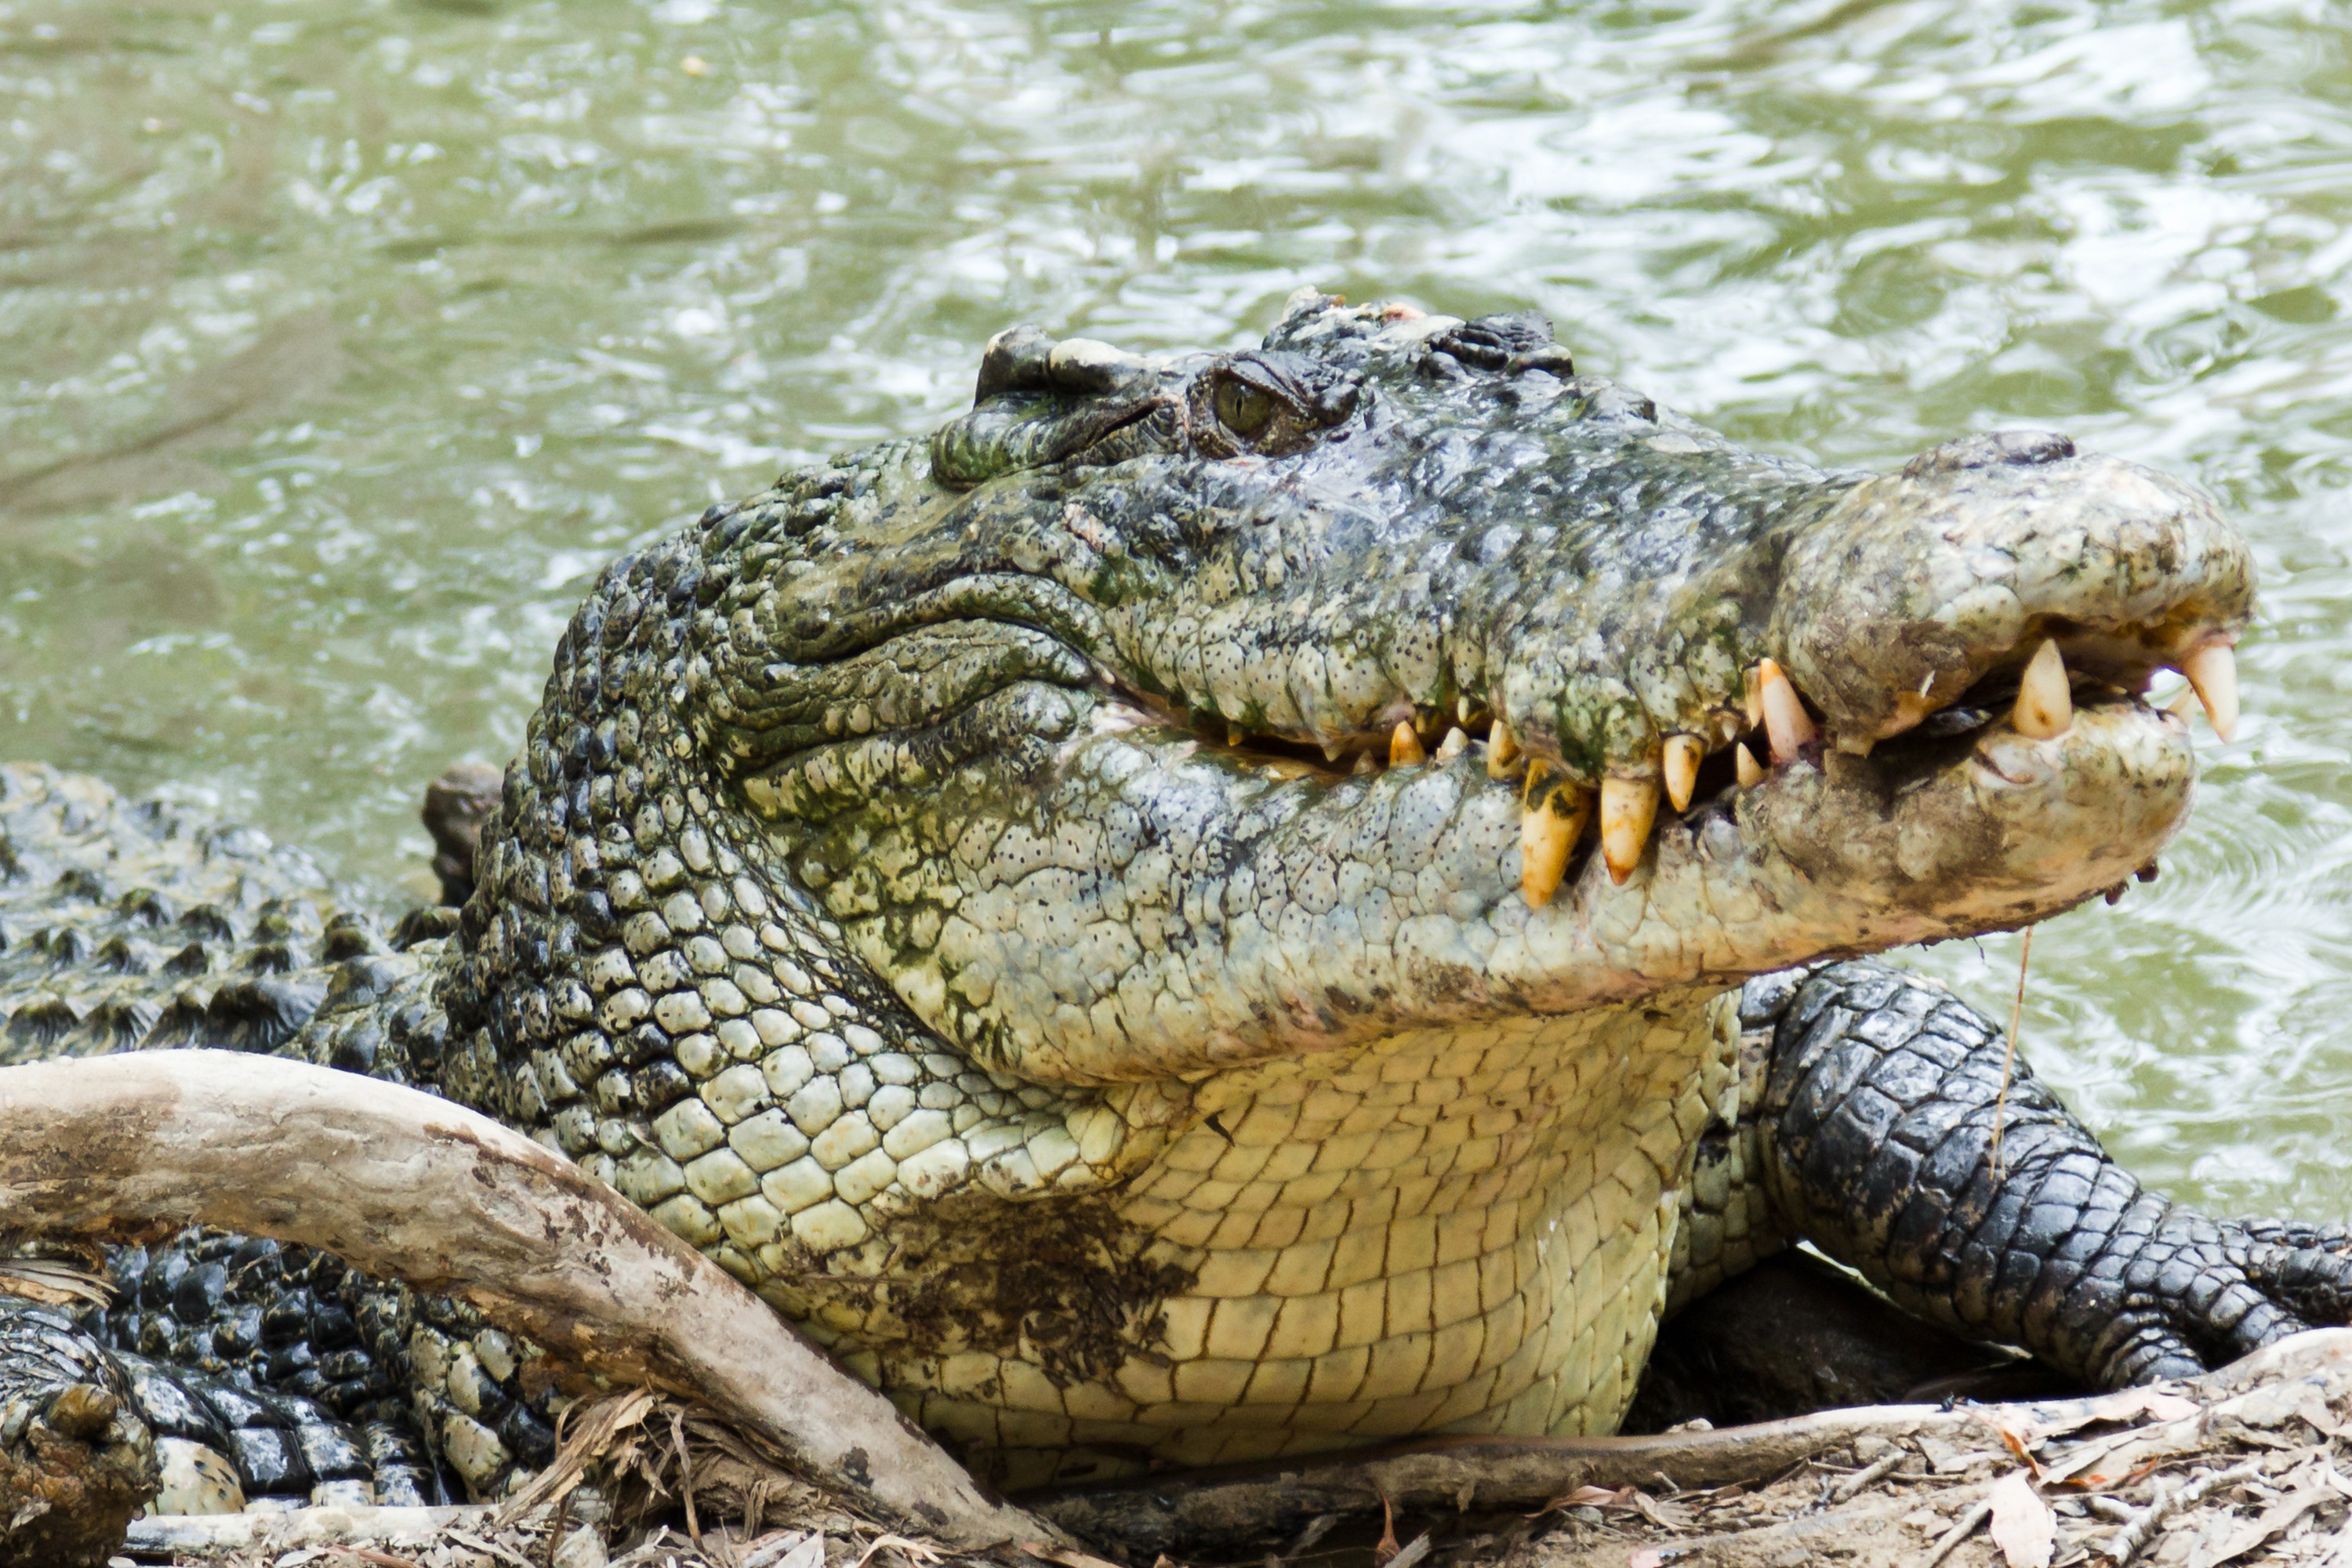 Tourist loses arm in crocodile attack while peeing in lagoon